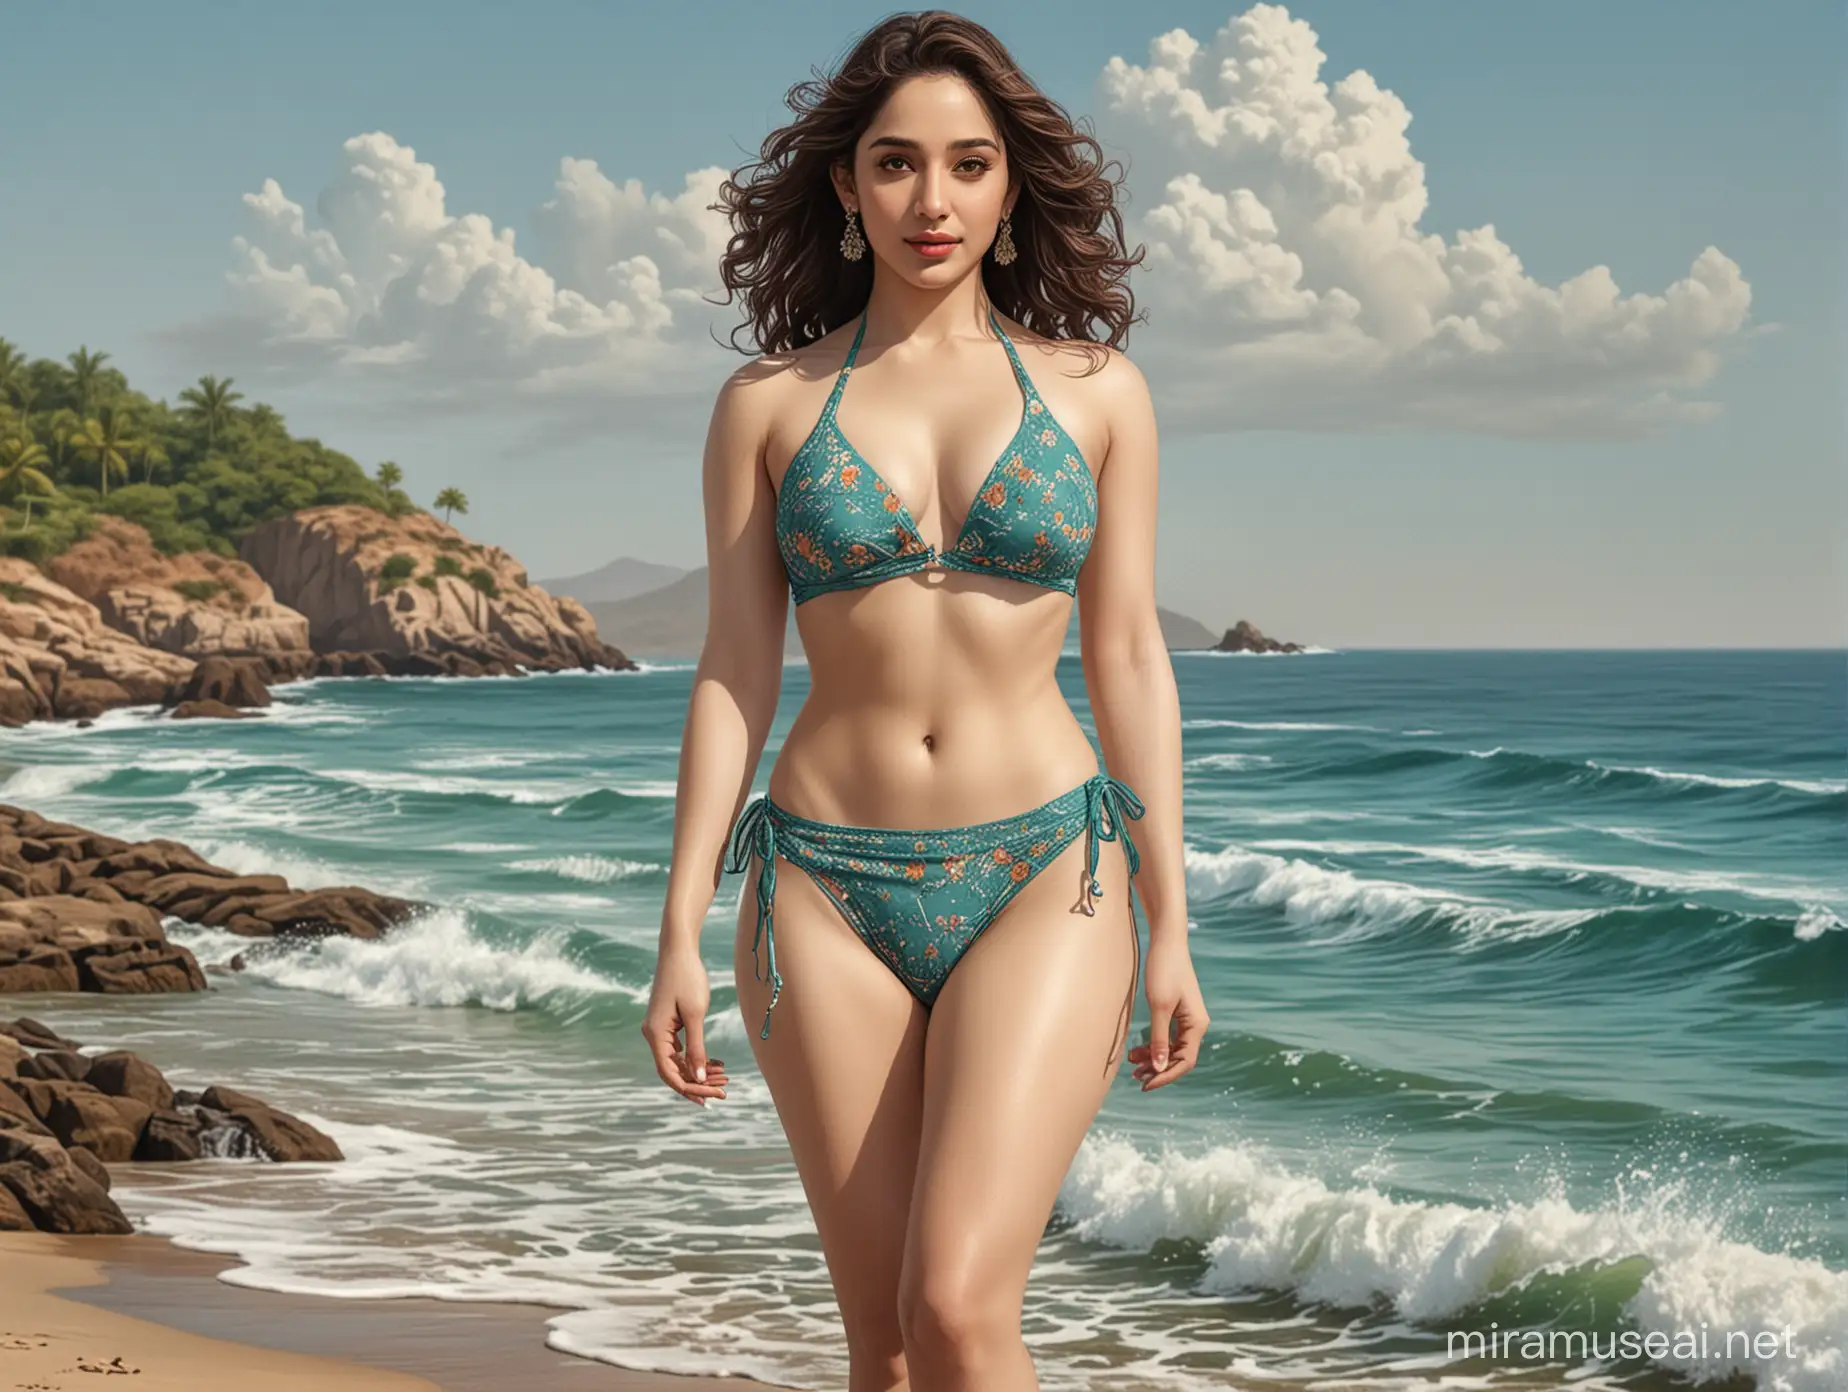 Draw an illustration style art image of Tamanna Bhatia, model actress, wearing two piece bikini in sea beach. Full body. Intricate details.